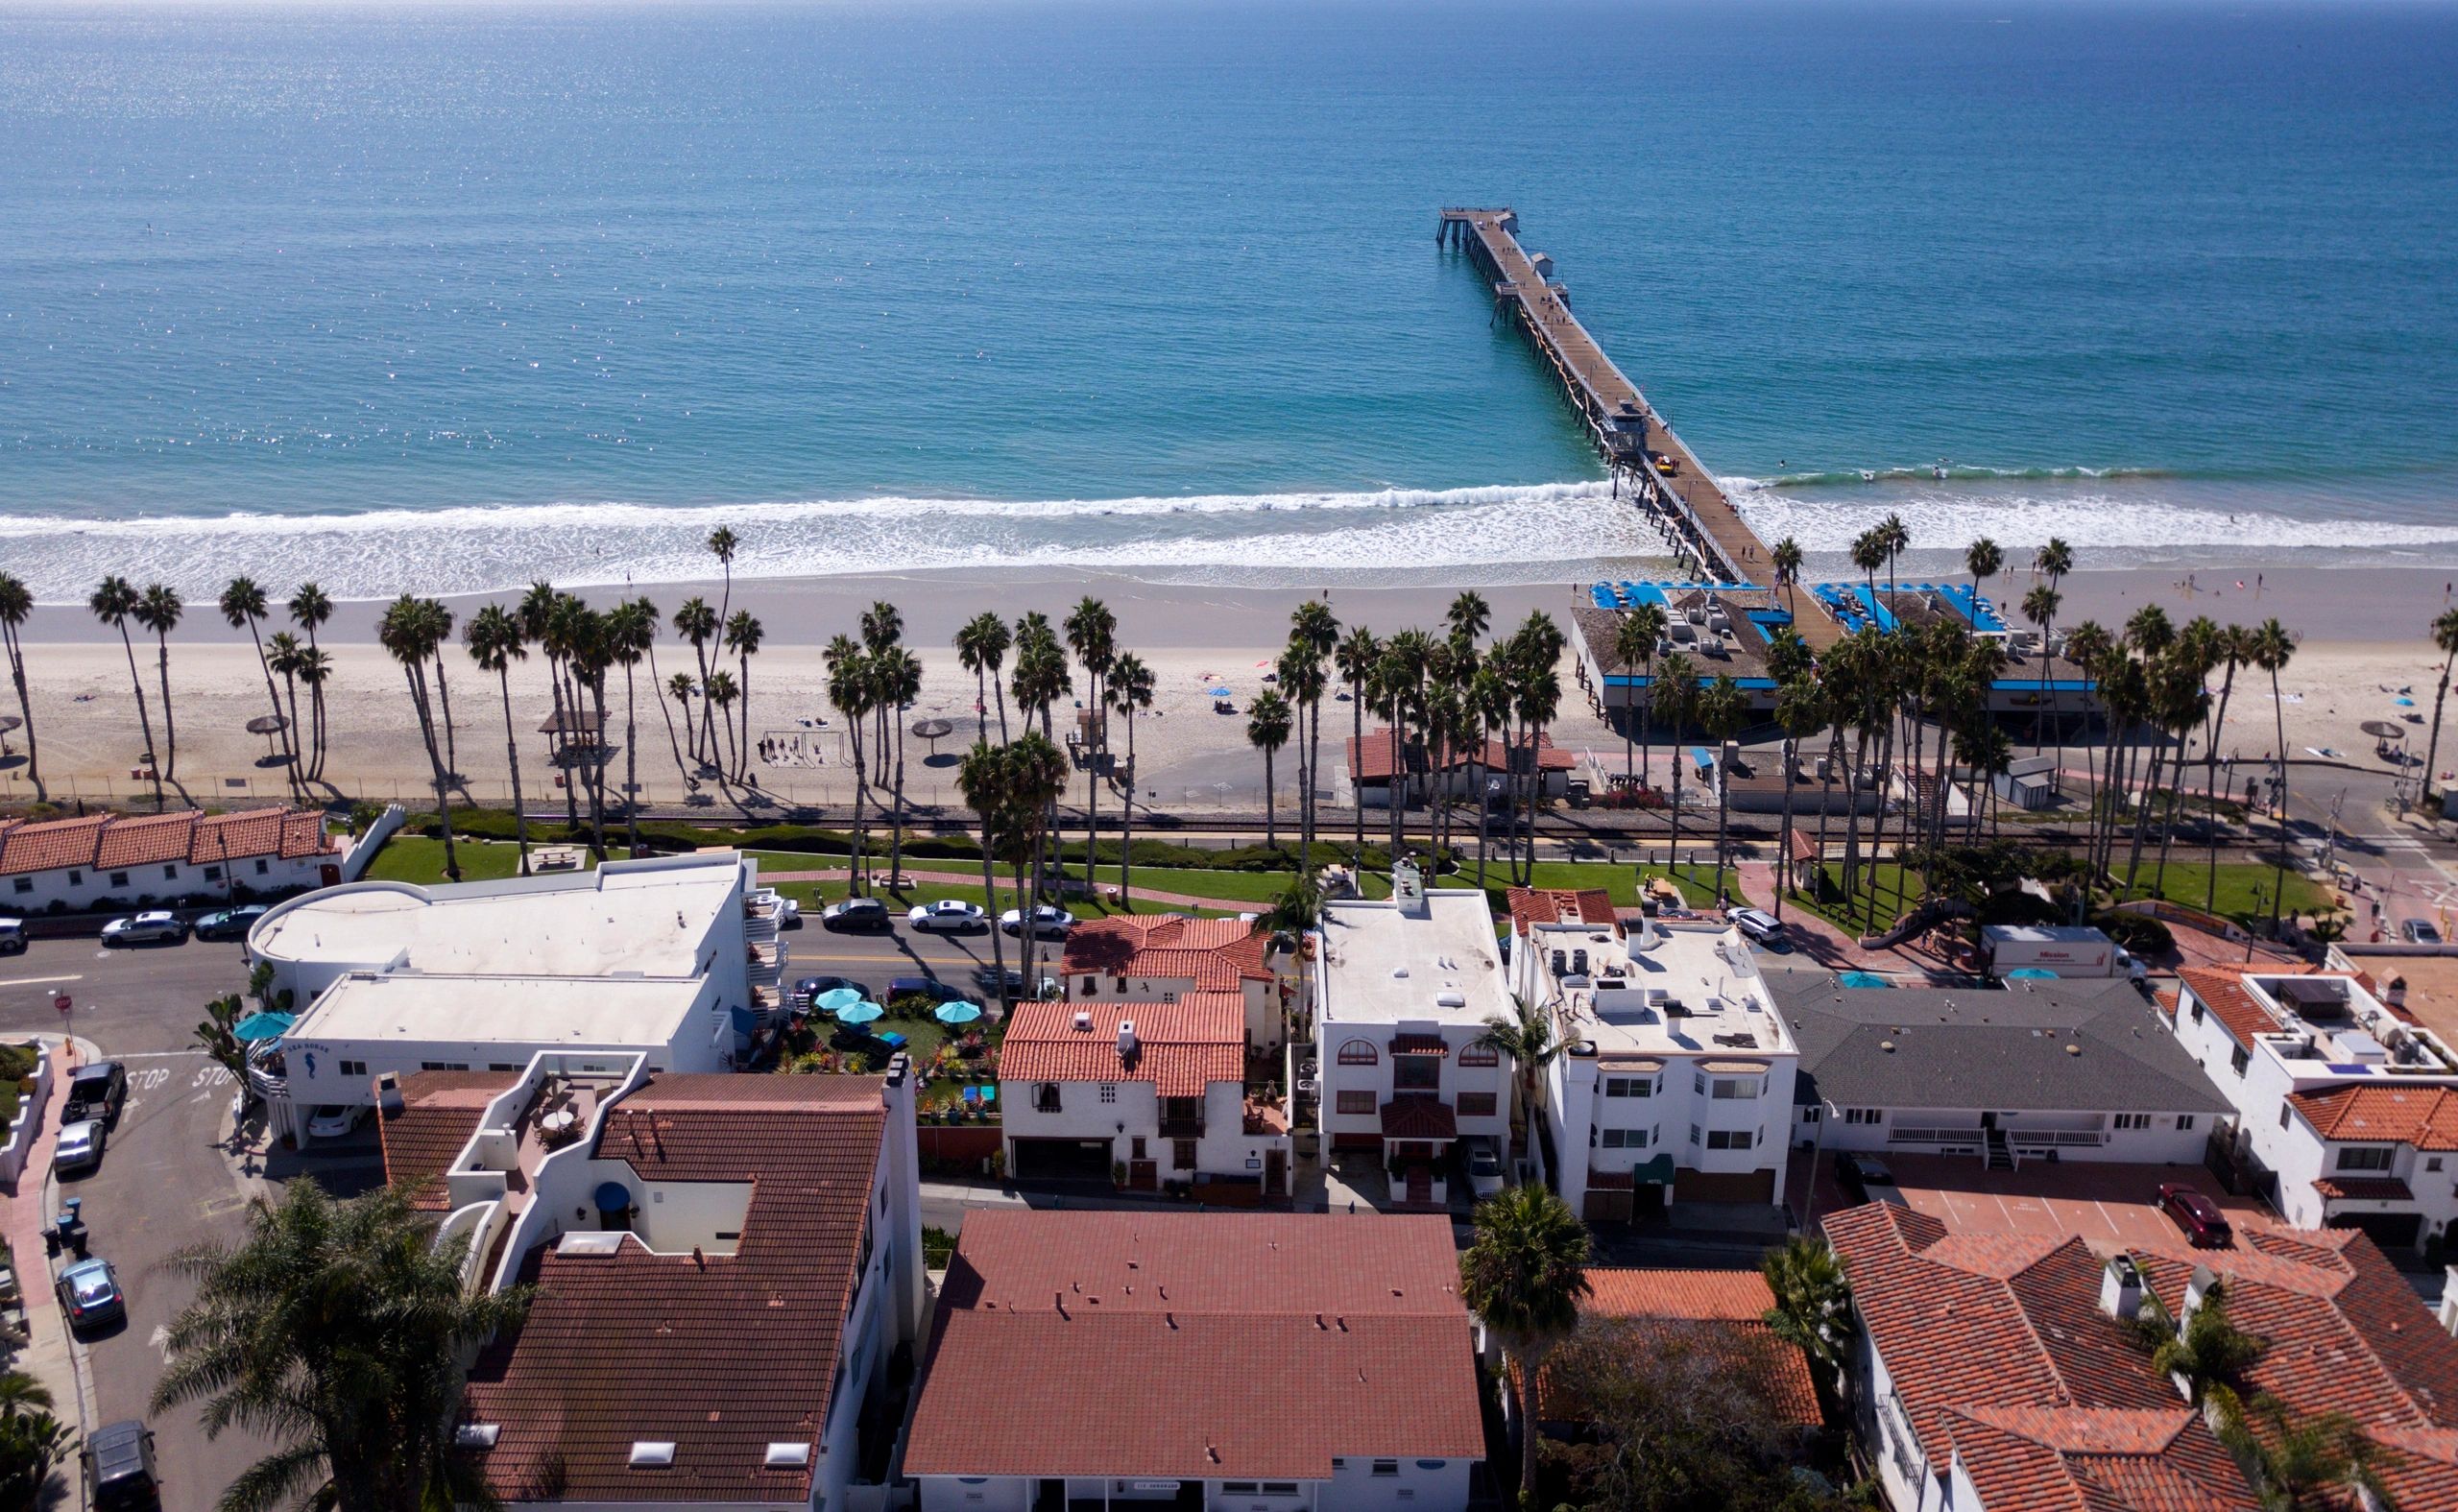 A view of the ocean from above shows houses and pier.